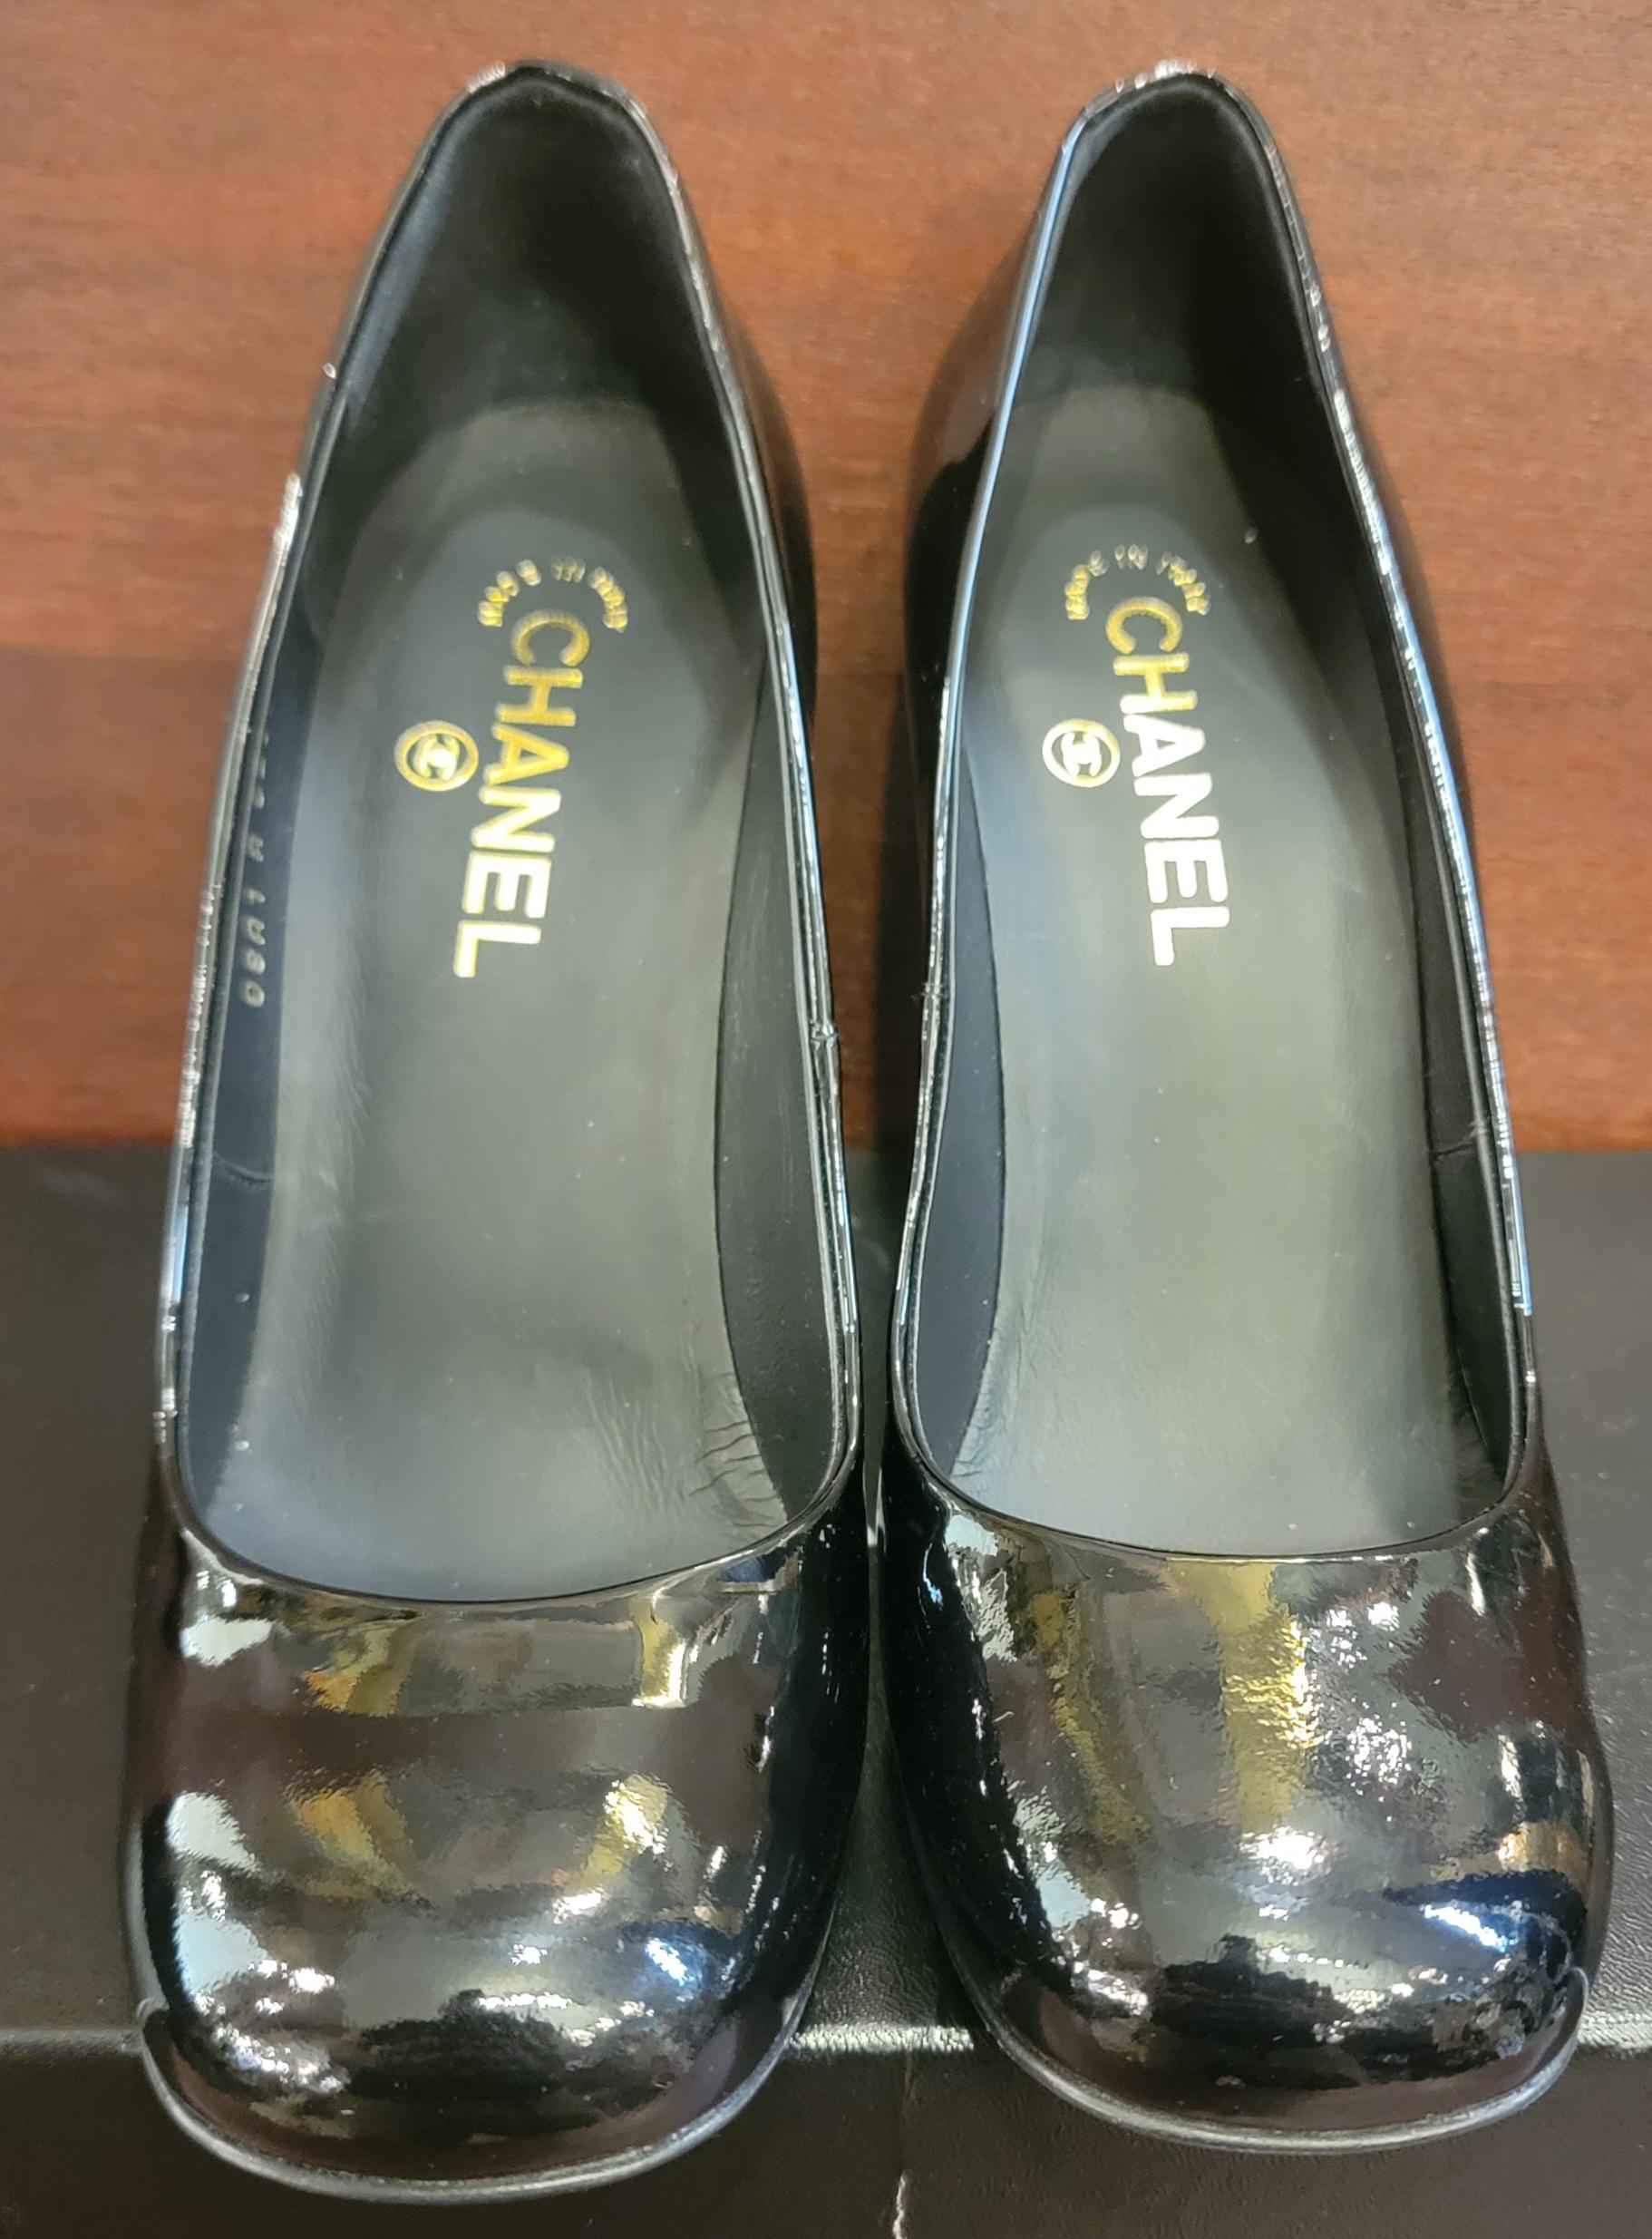 Noir Authentic Brand New Chanel size 39.5 High Heel Shoes with Chanel Gold Accent en vente